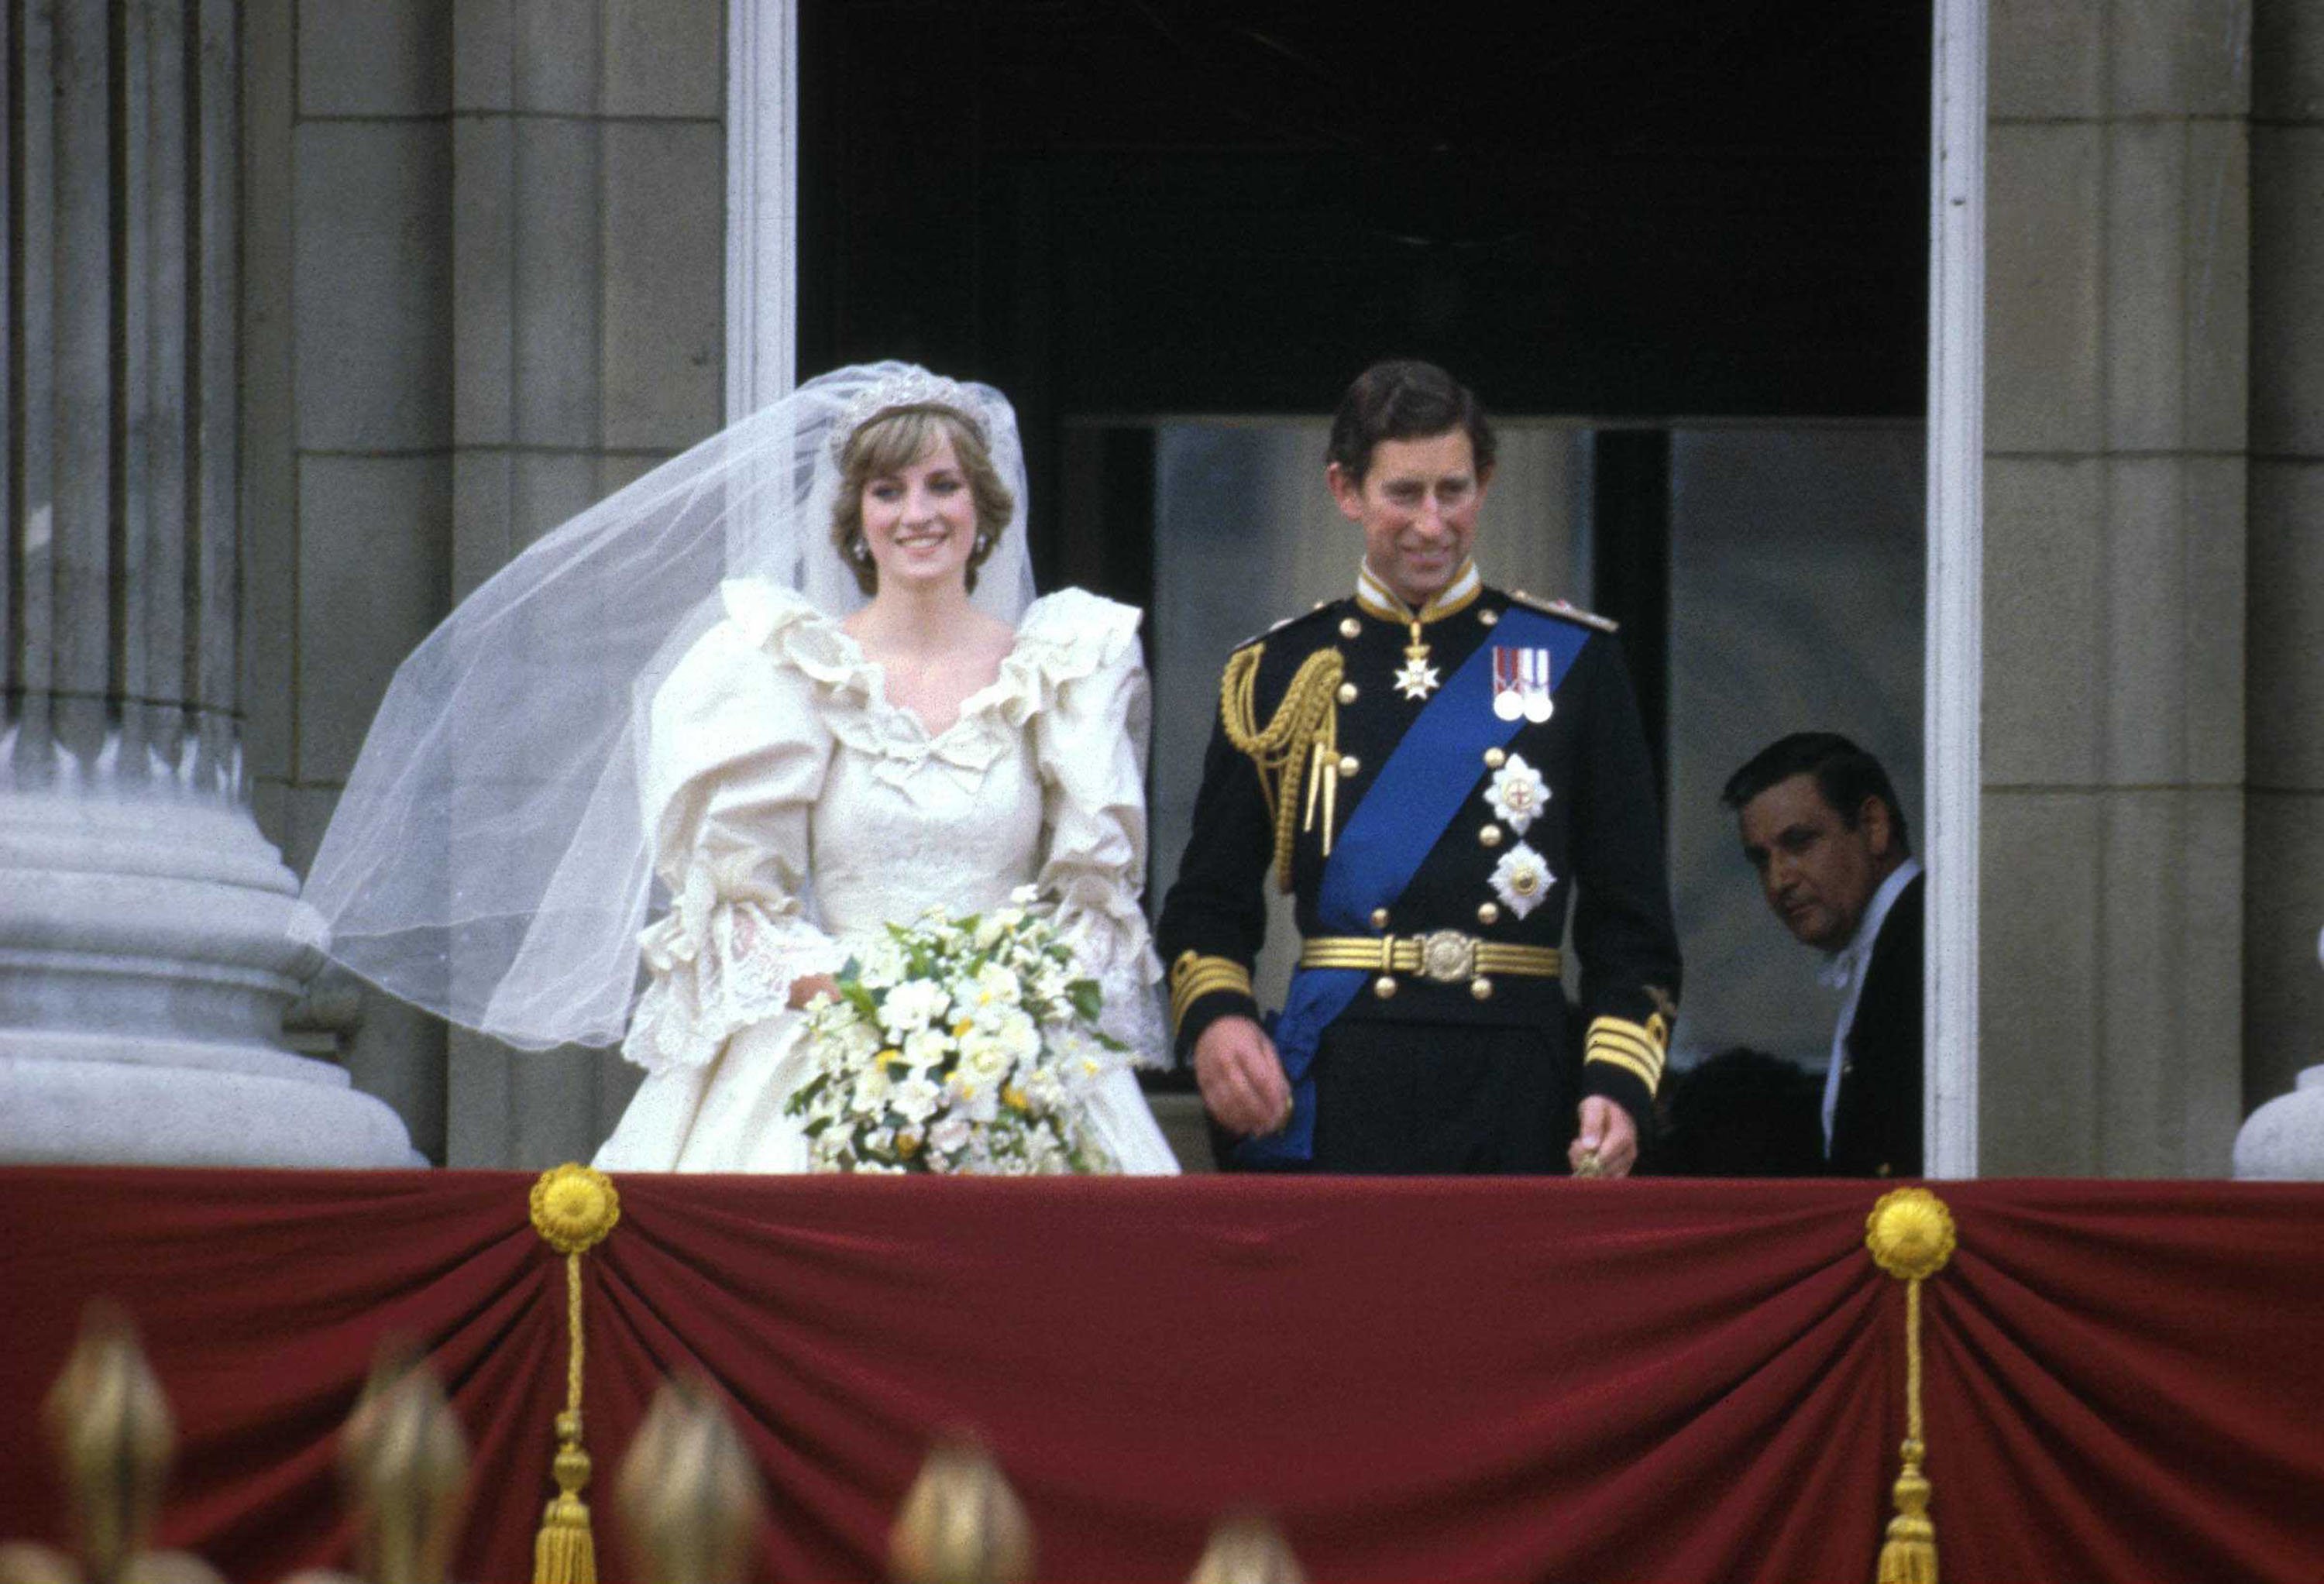 Prince Charles and Princess Diana stand on the balcony of Buckingham Palace after their wedding ceremony at St. Paul's Cathedral on July 29, 1981, London, England | Photo: Getty Images